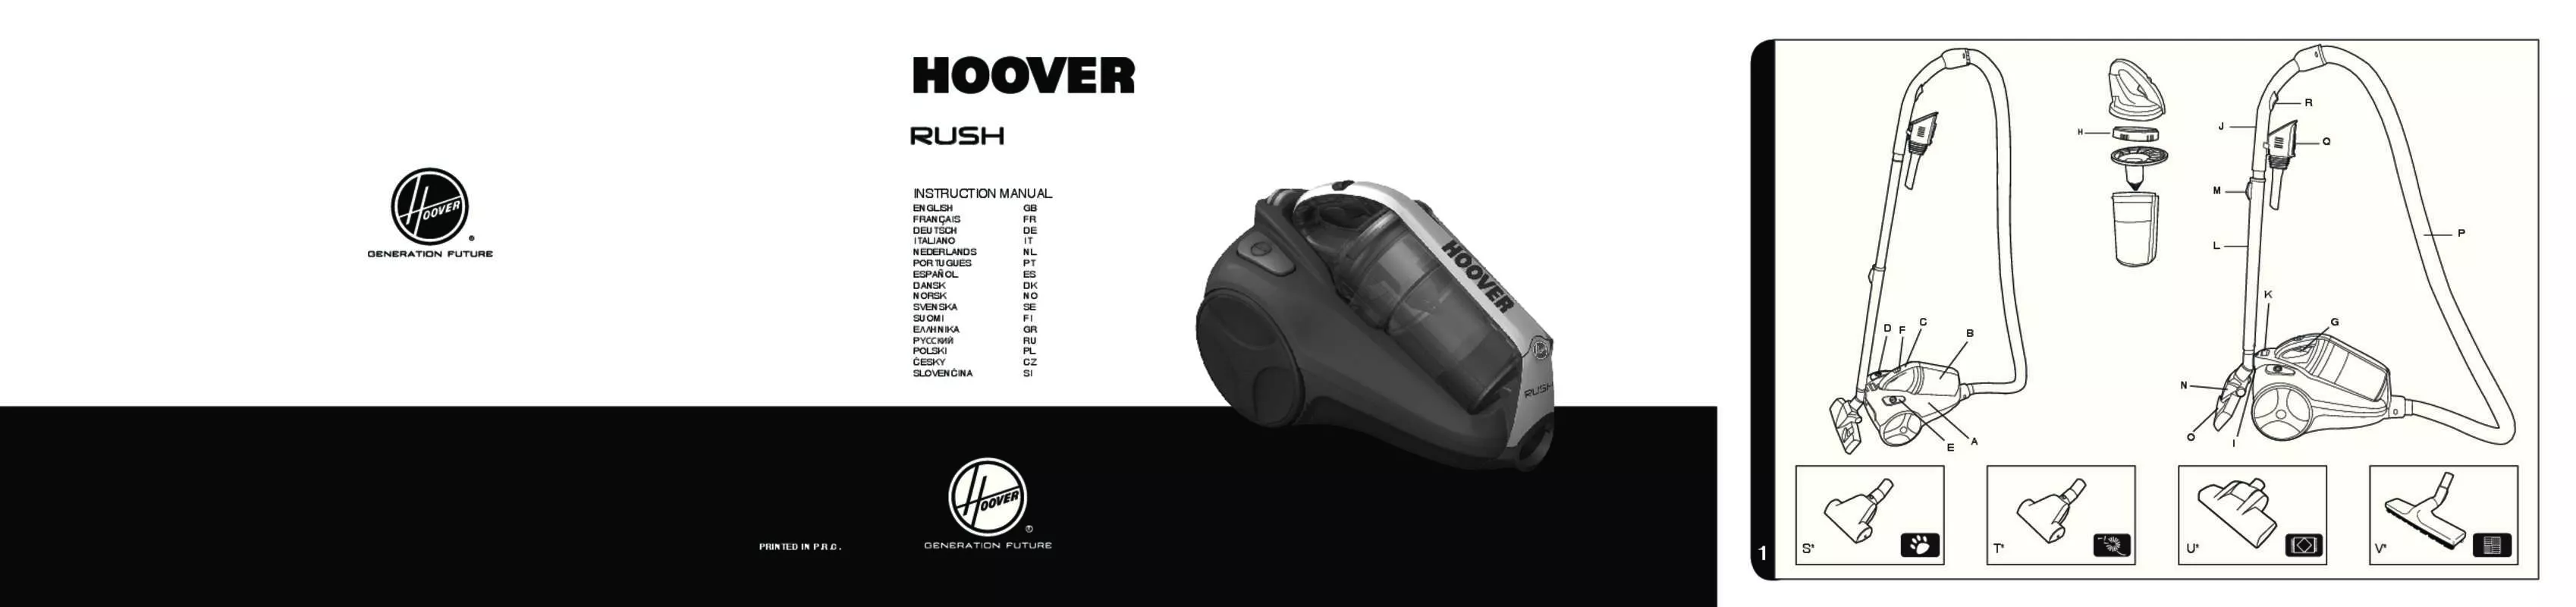 Mode d'emploi HOOVER TCR 4213